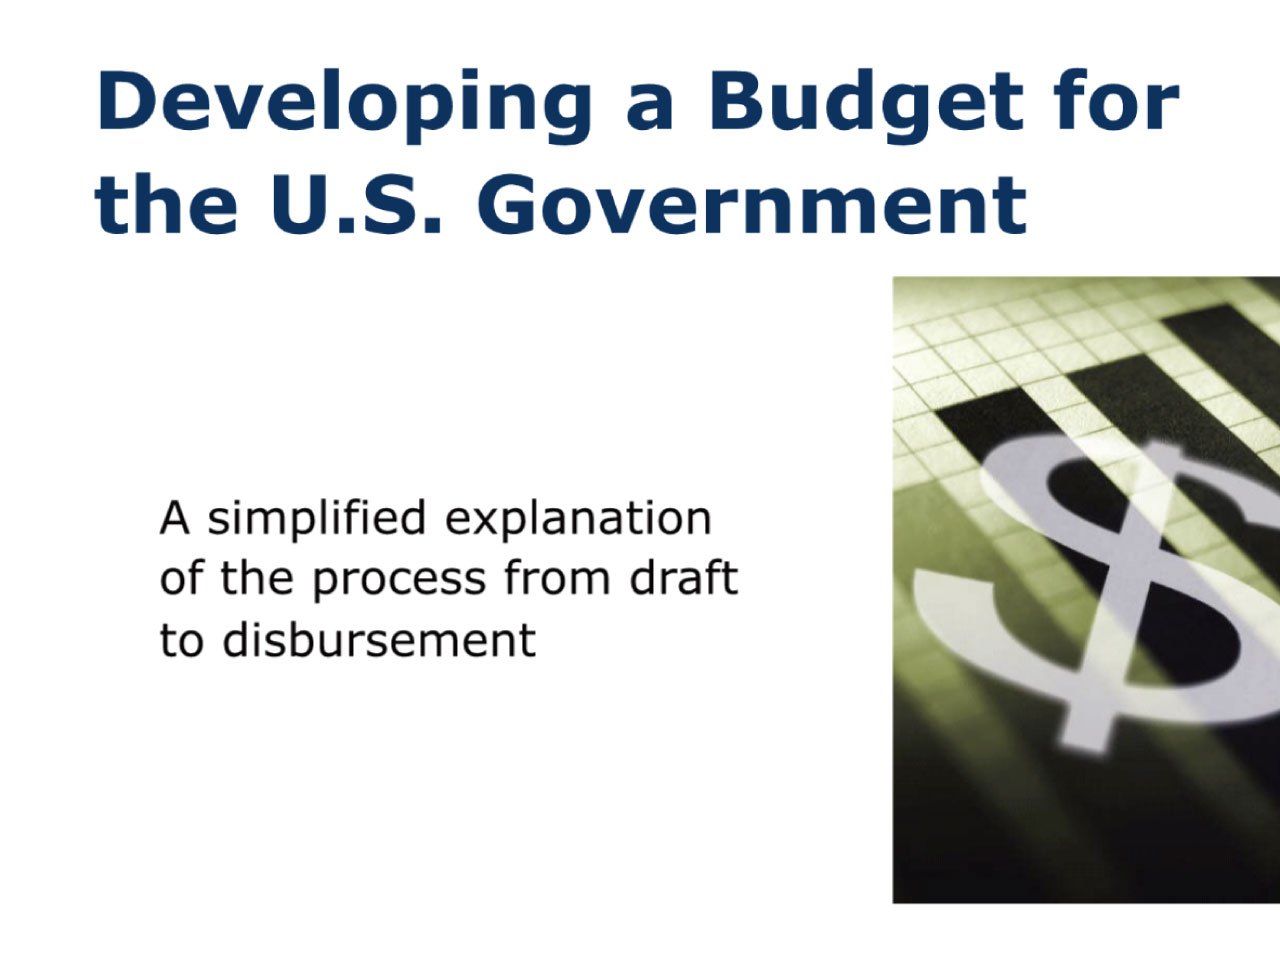 Developing a Budget for the U.